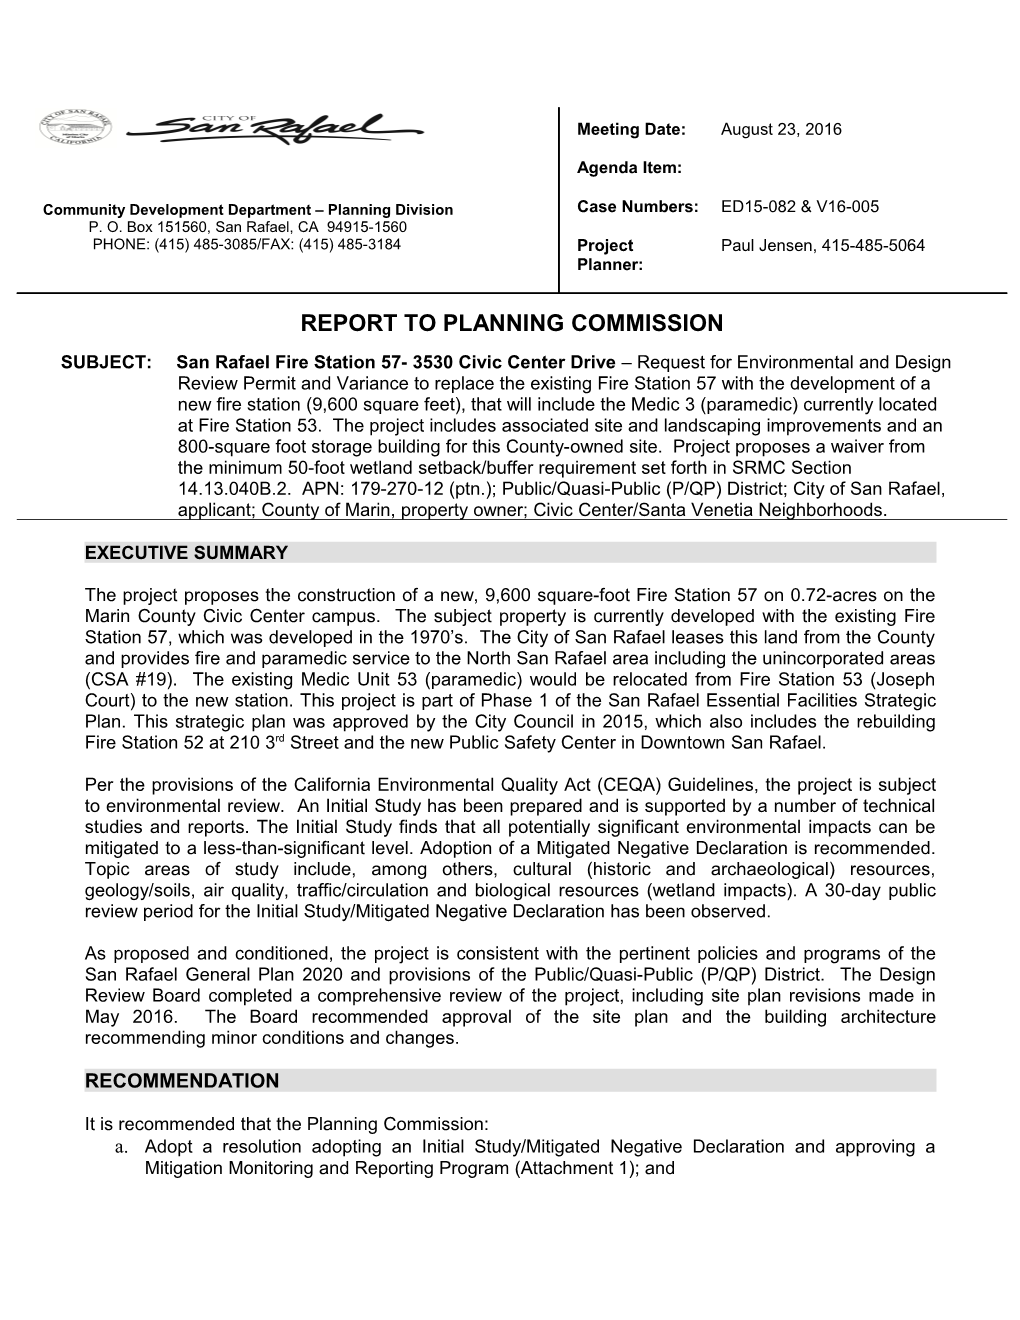 REPORT to PLANNING COMMISSION - Case No: ED15-082V16-005 Page 1